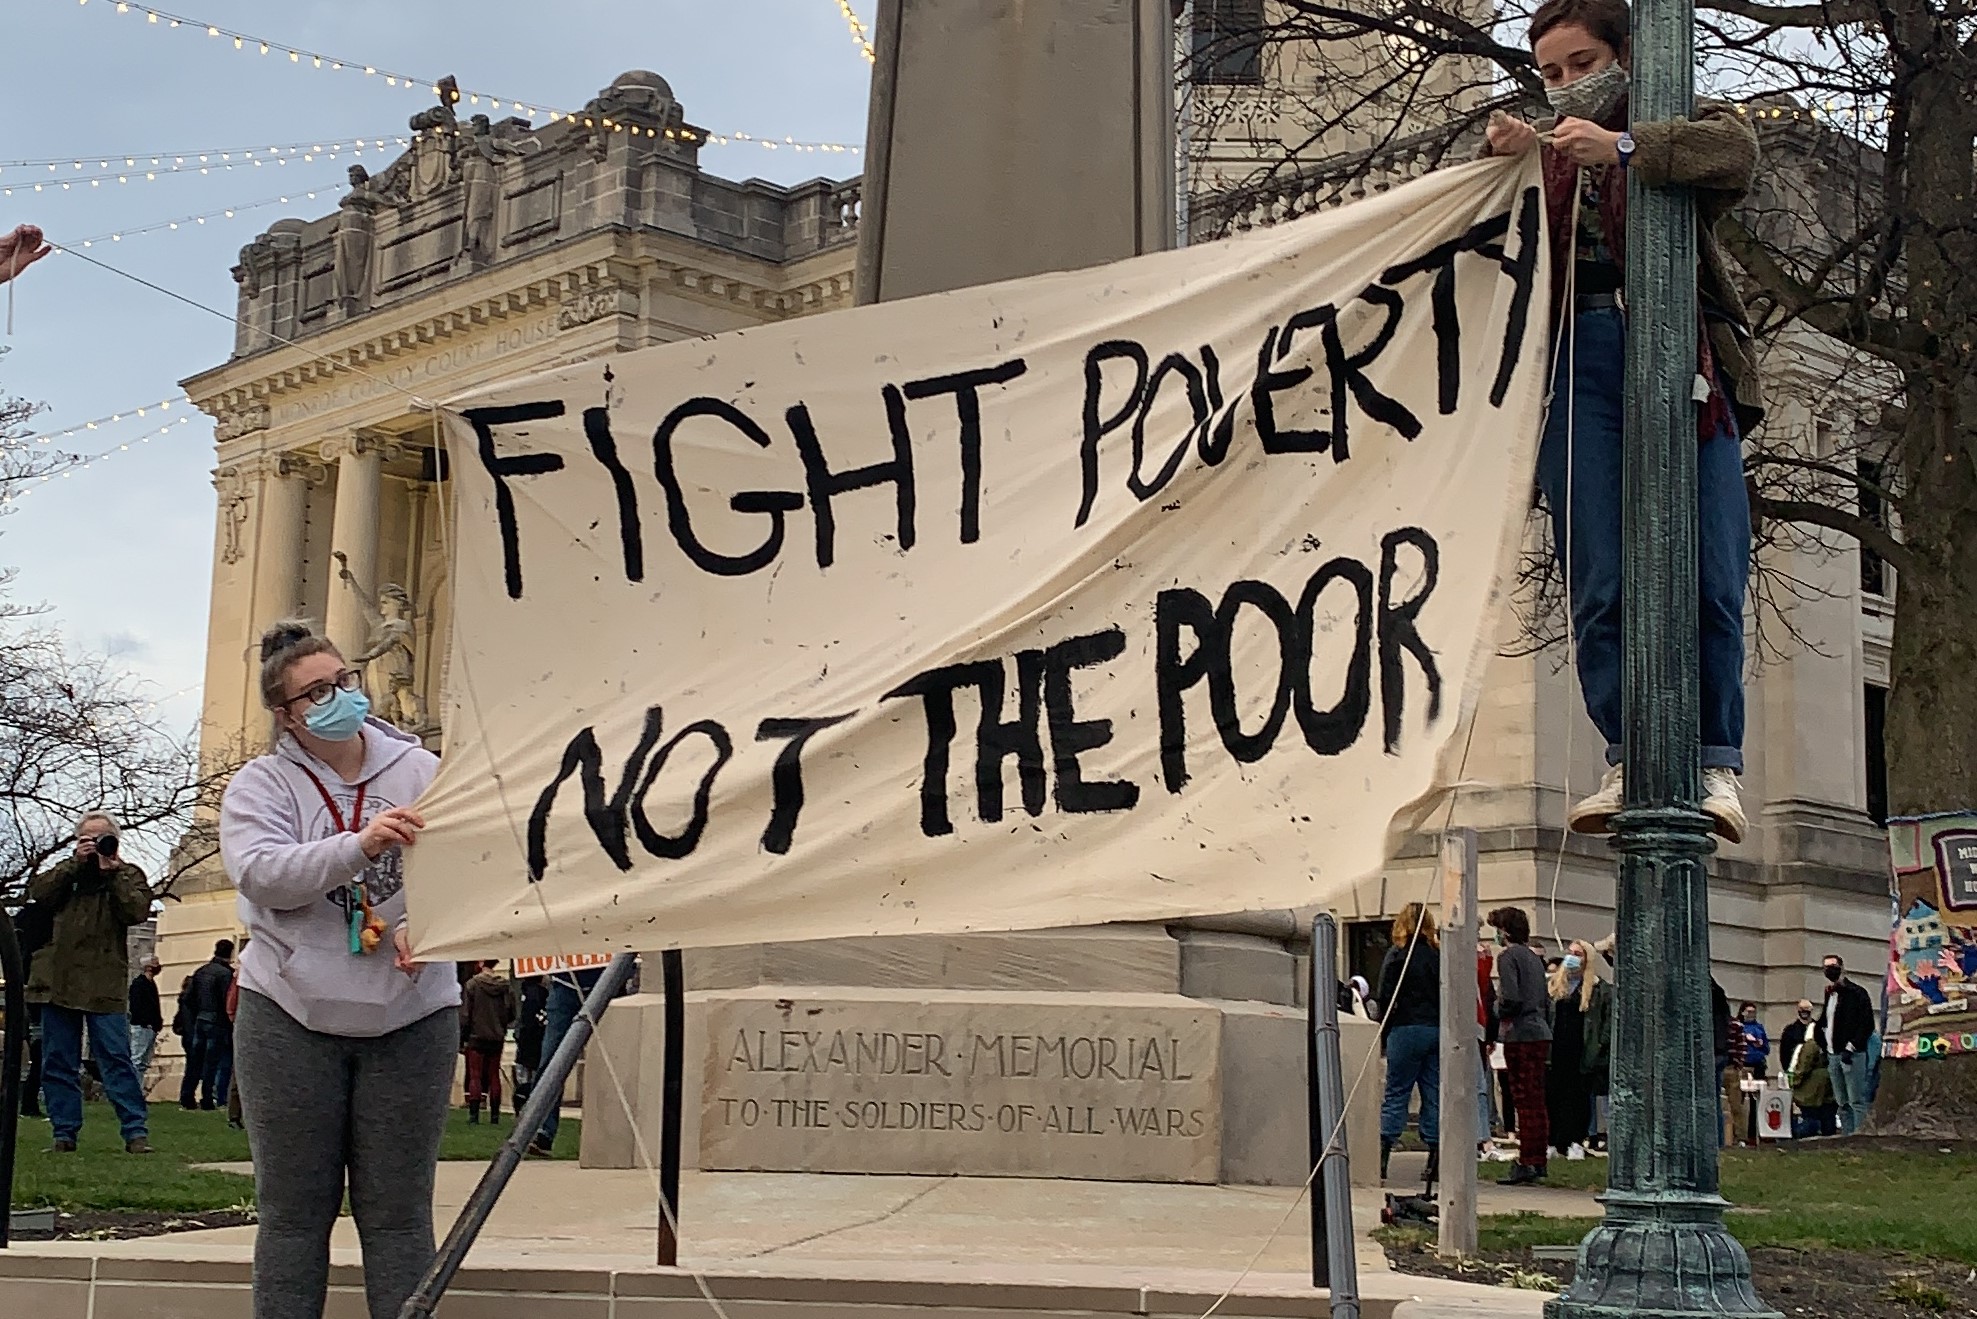 A photo of a sign that says "Fight Poverty, Not The Poor."